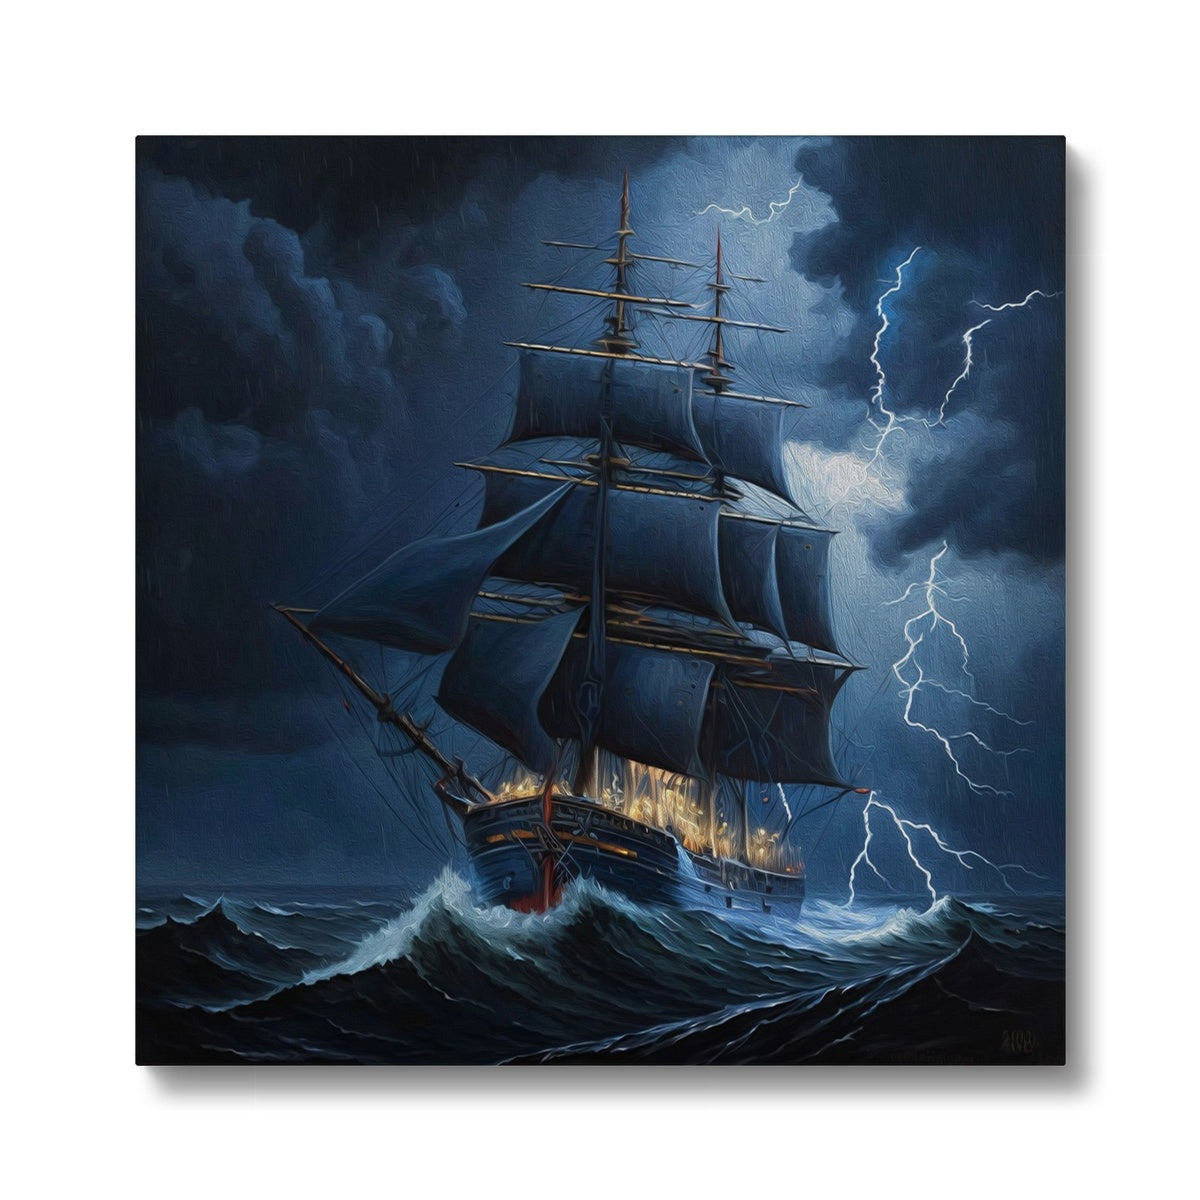 Ship In The Stormy Sea Illustration Canvas